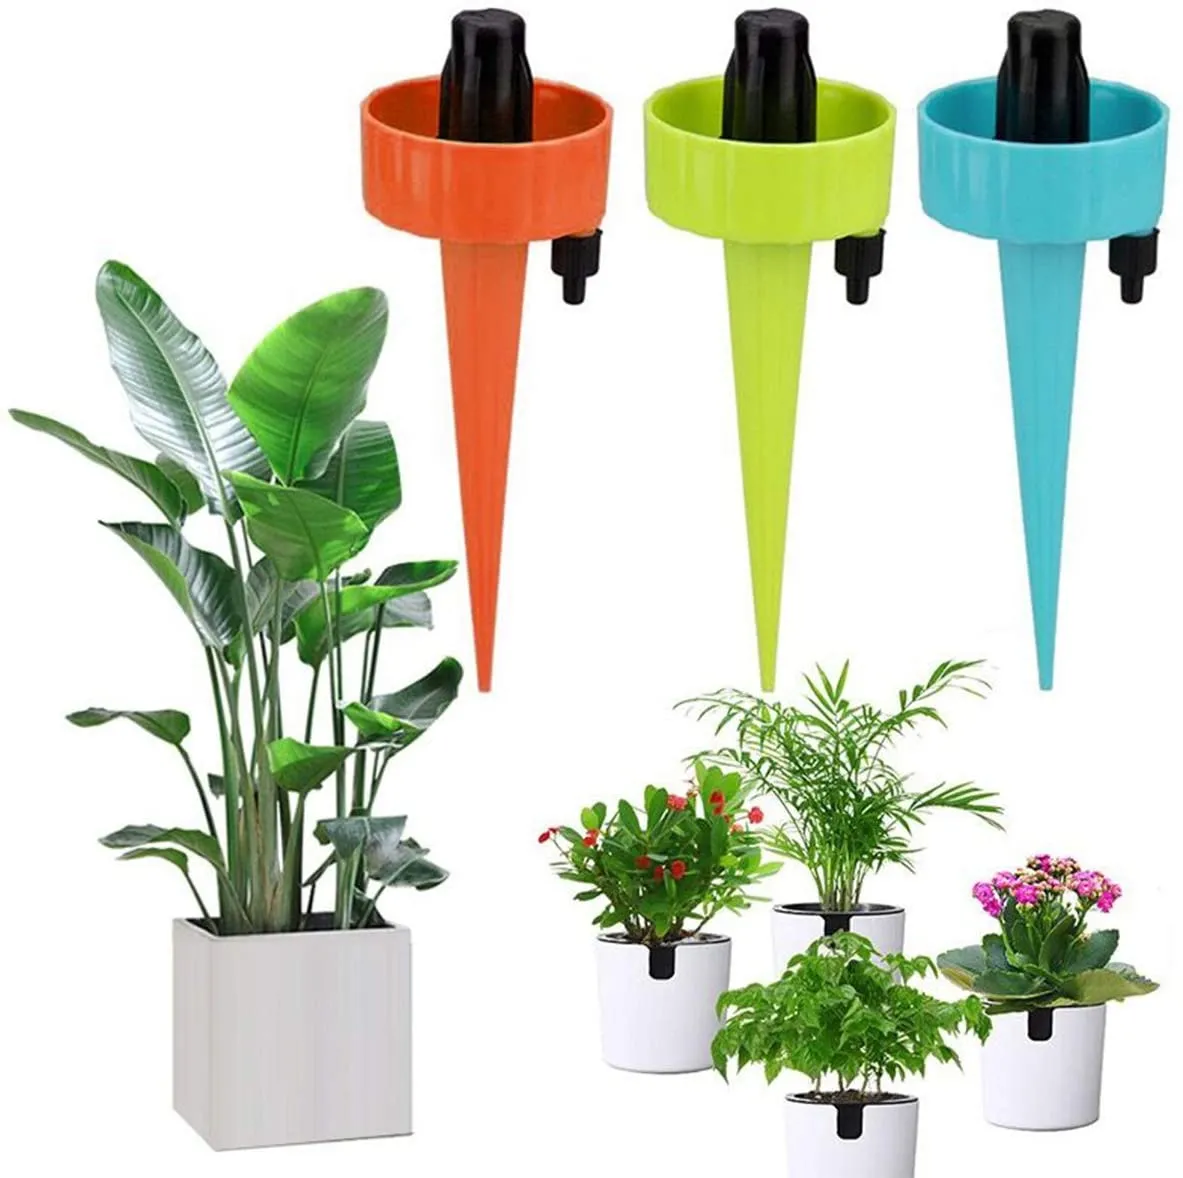 14pcs Adjustable Plant Waterer, Indoor Outdoor Automatic Plant